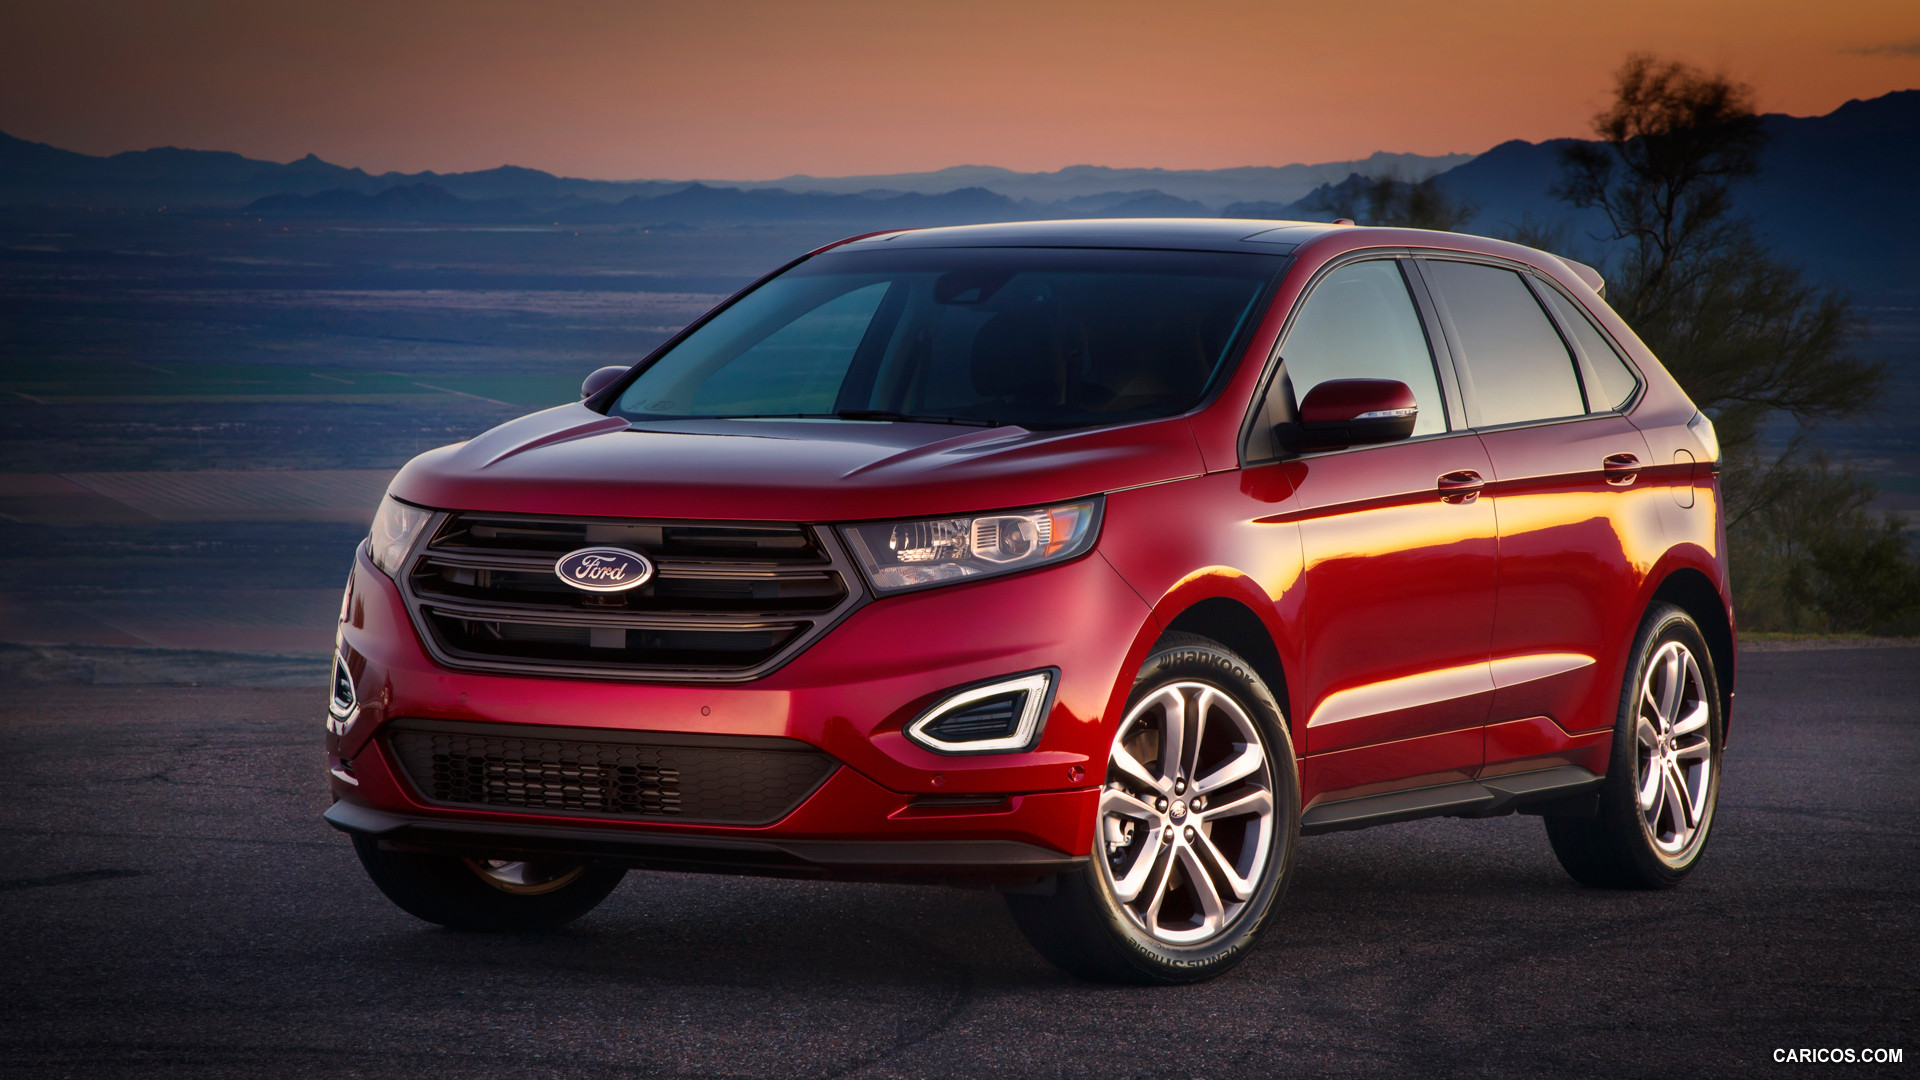 Ford Edge Wallpaper Image Group